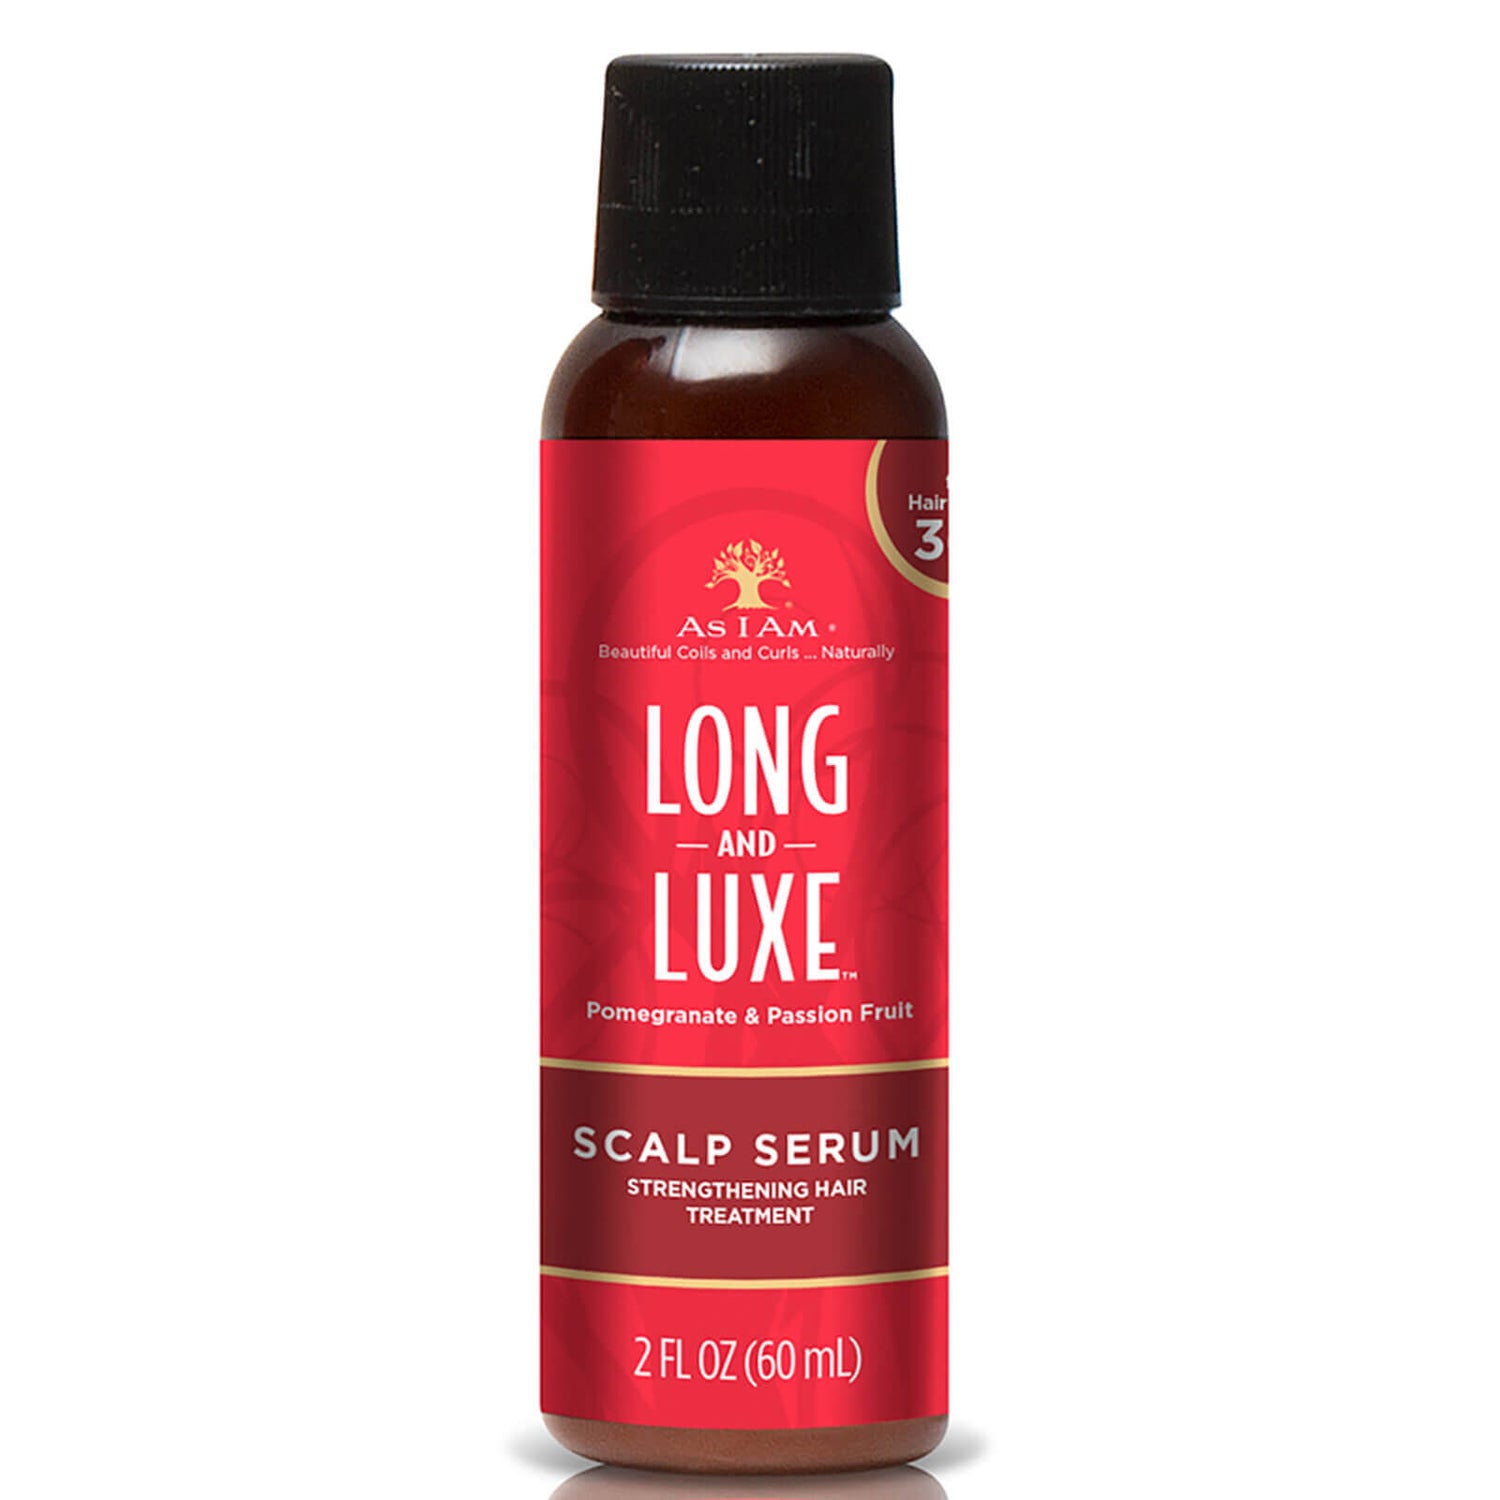 As I Am Long and Luxe Scalp Serum 60 ml